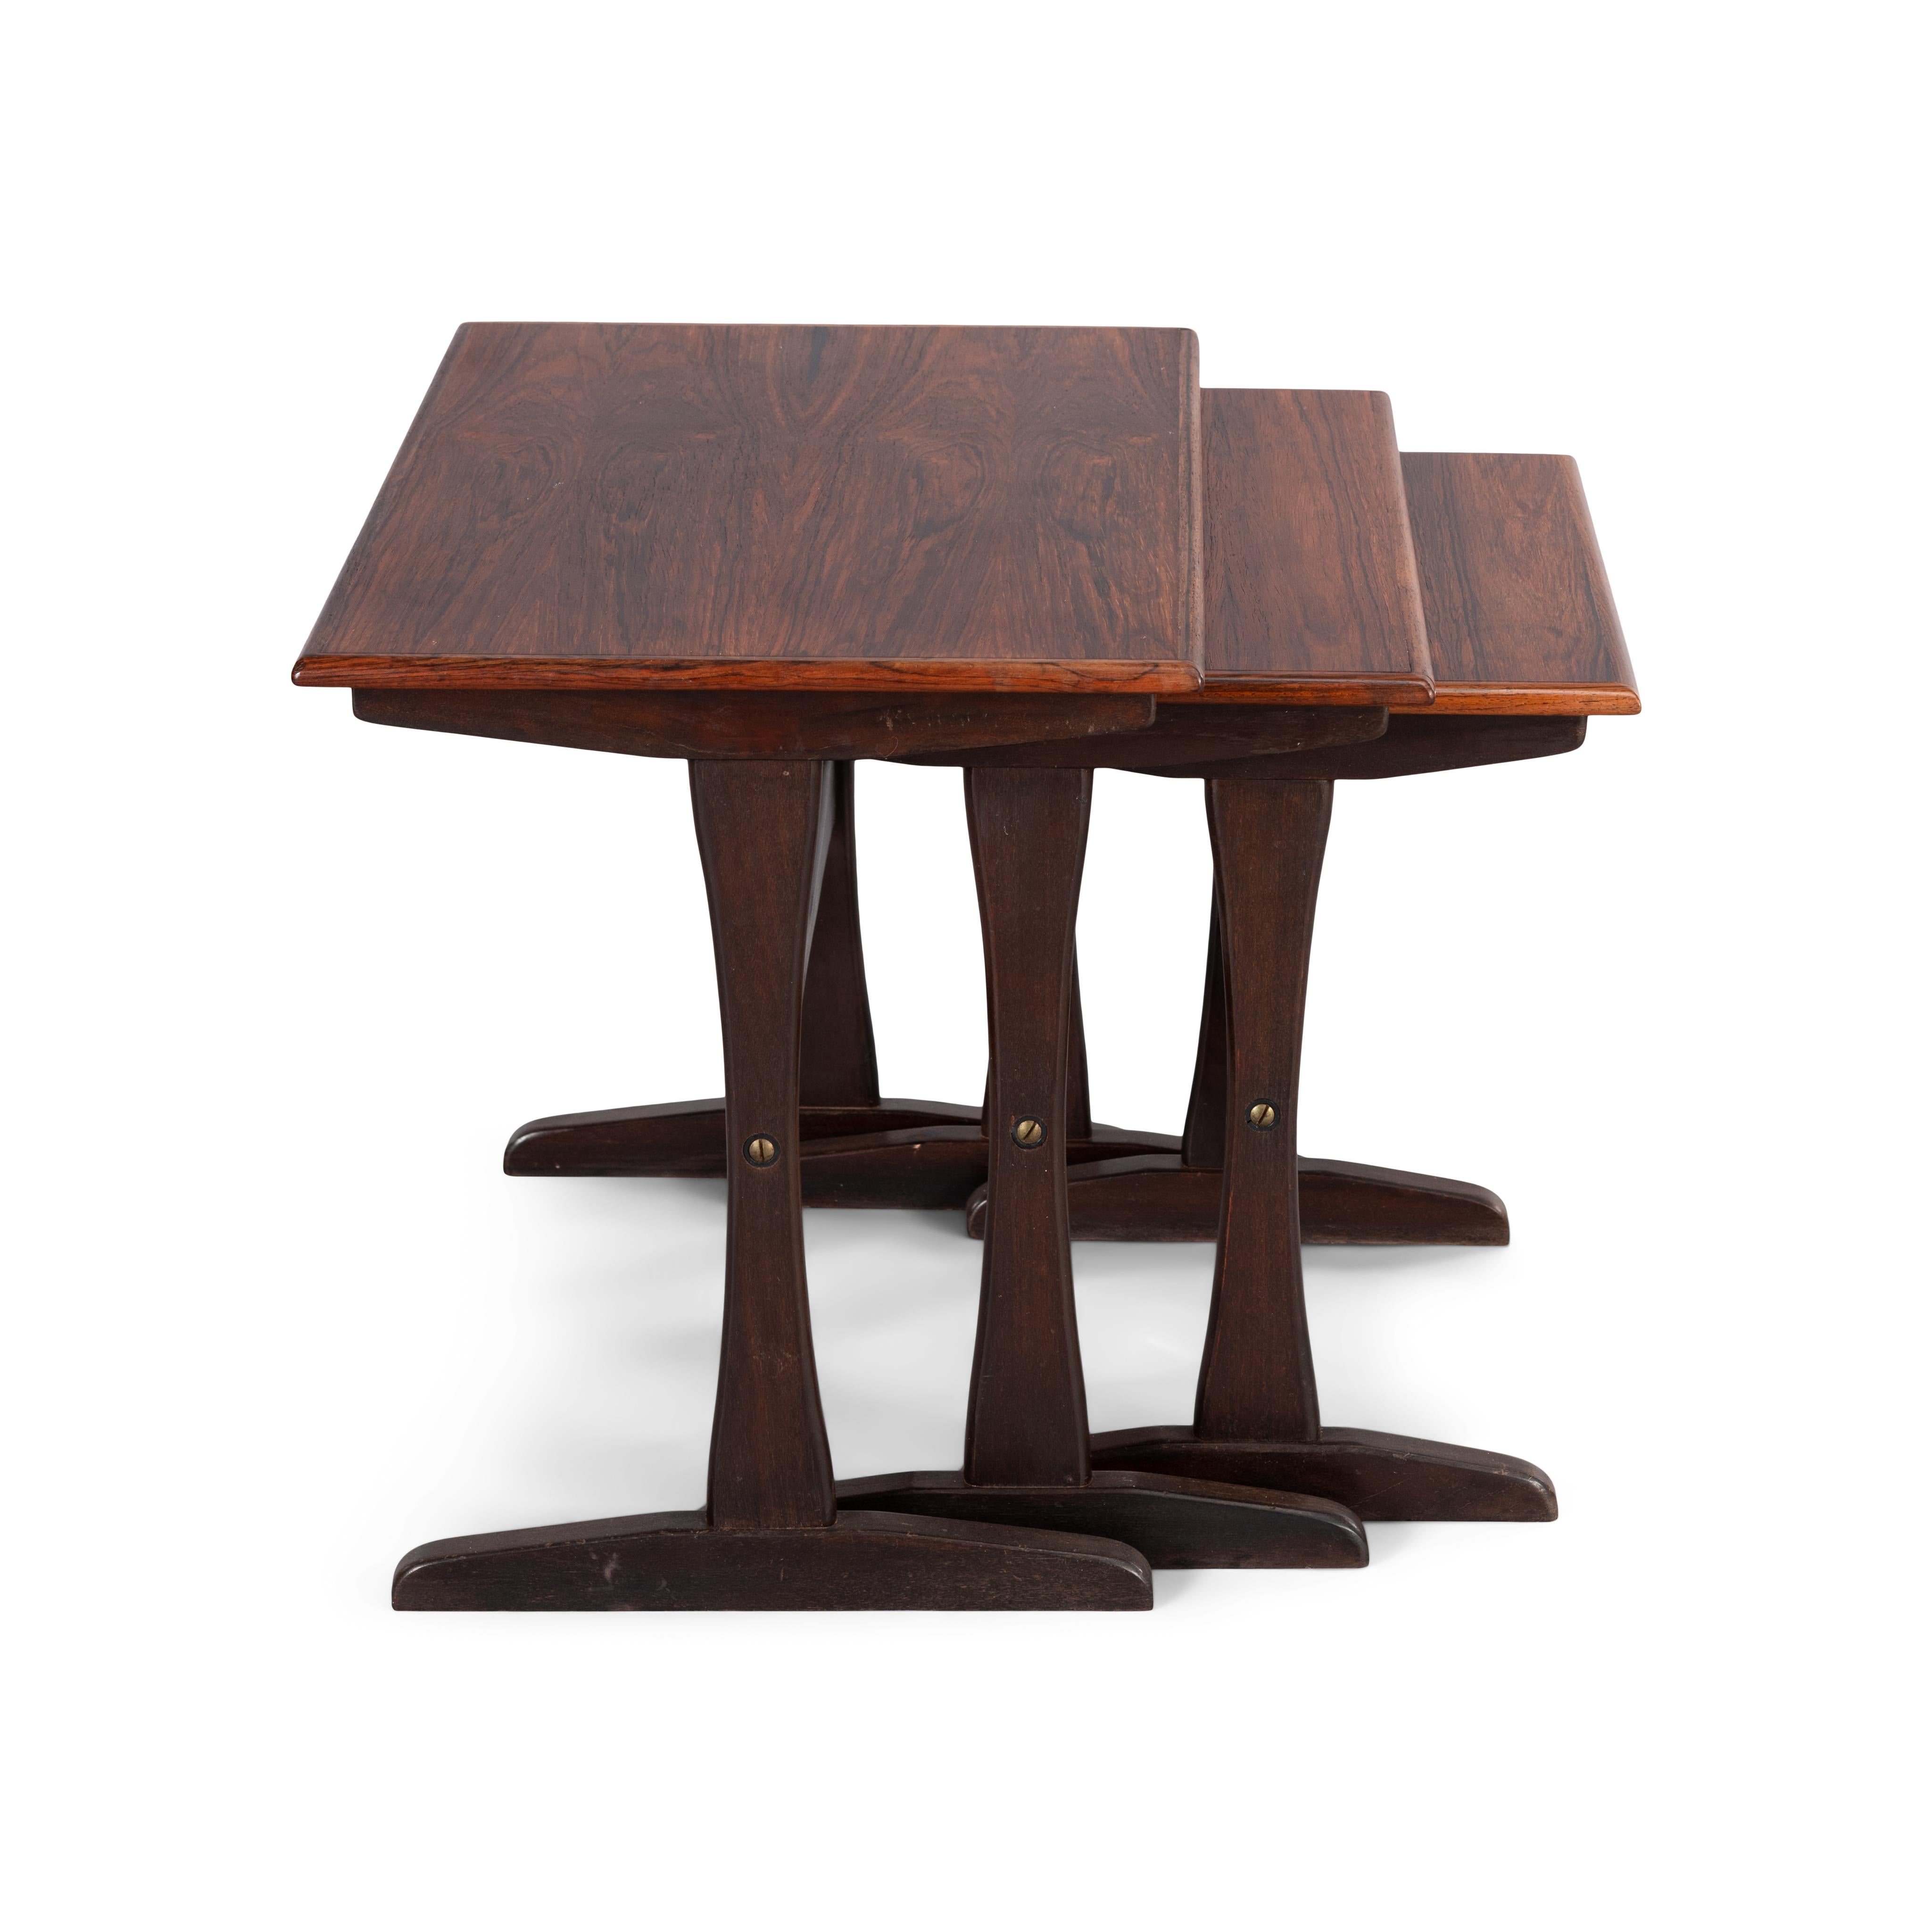 Set off mahogany side tables by Kai Kristiansen. Each table consists of a stained beech or oak base and a mahogany veneered top. The tops have been renewed with an acrylic protective coat. This has brought these nesting tables to an excellent